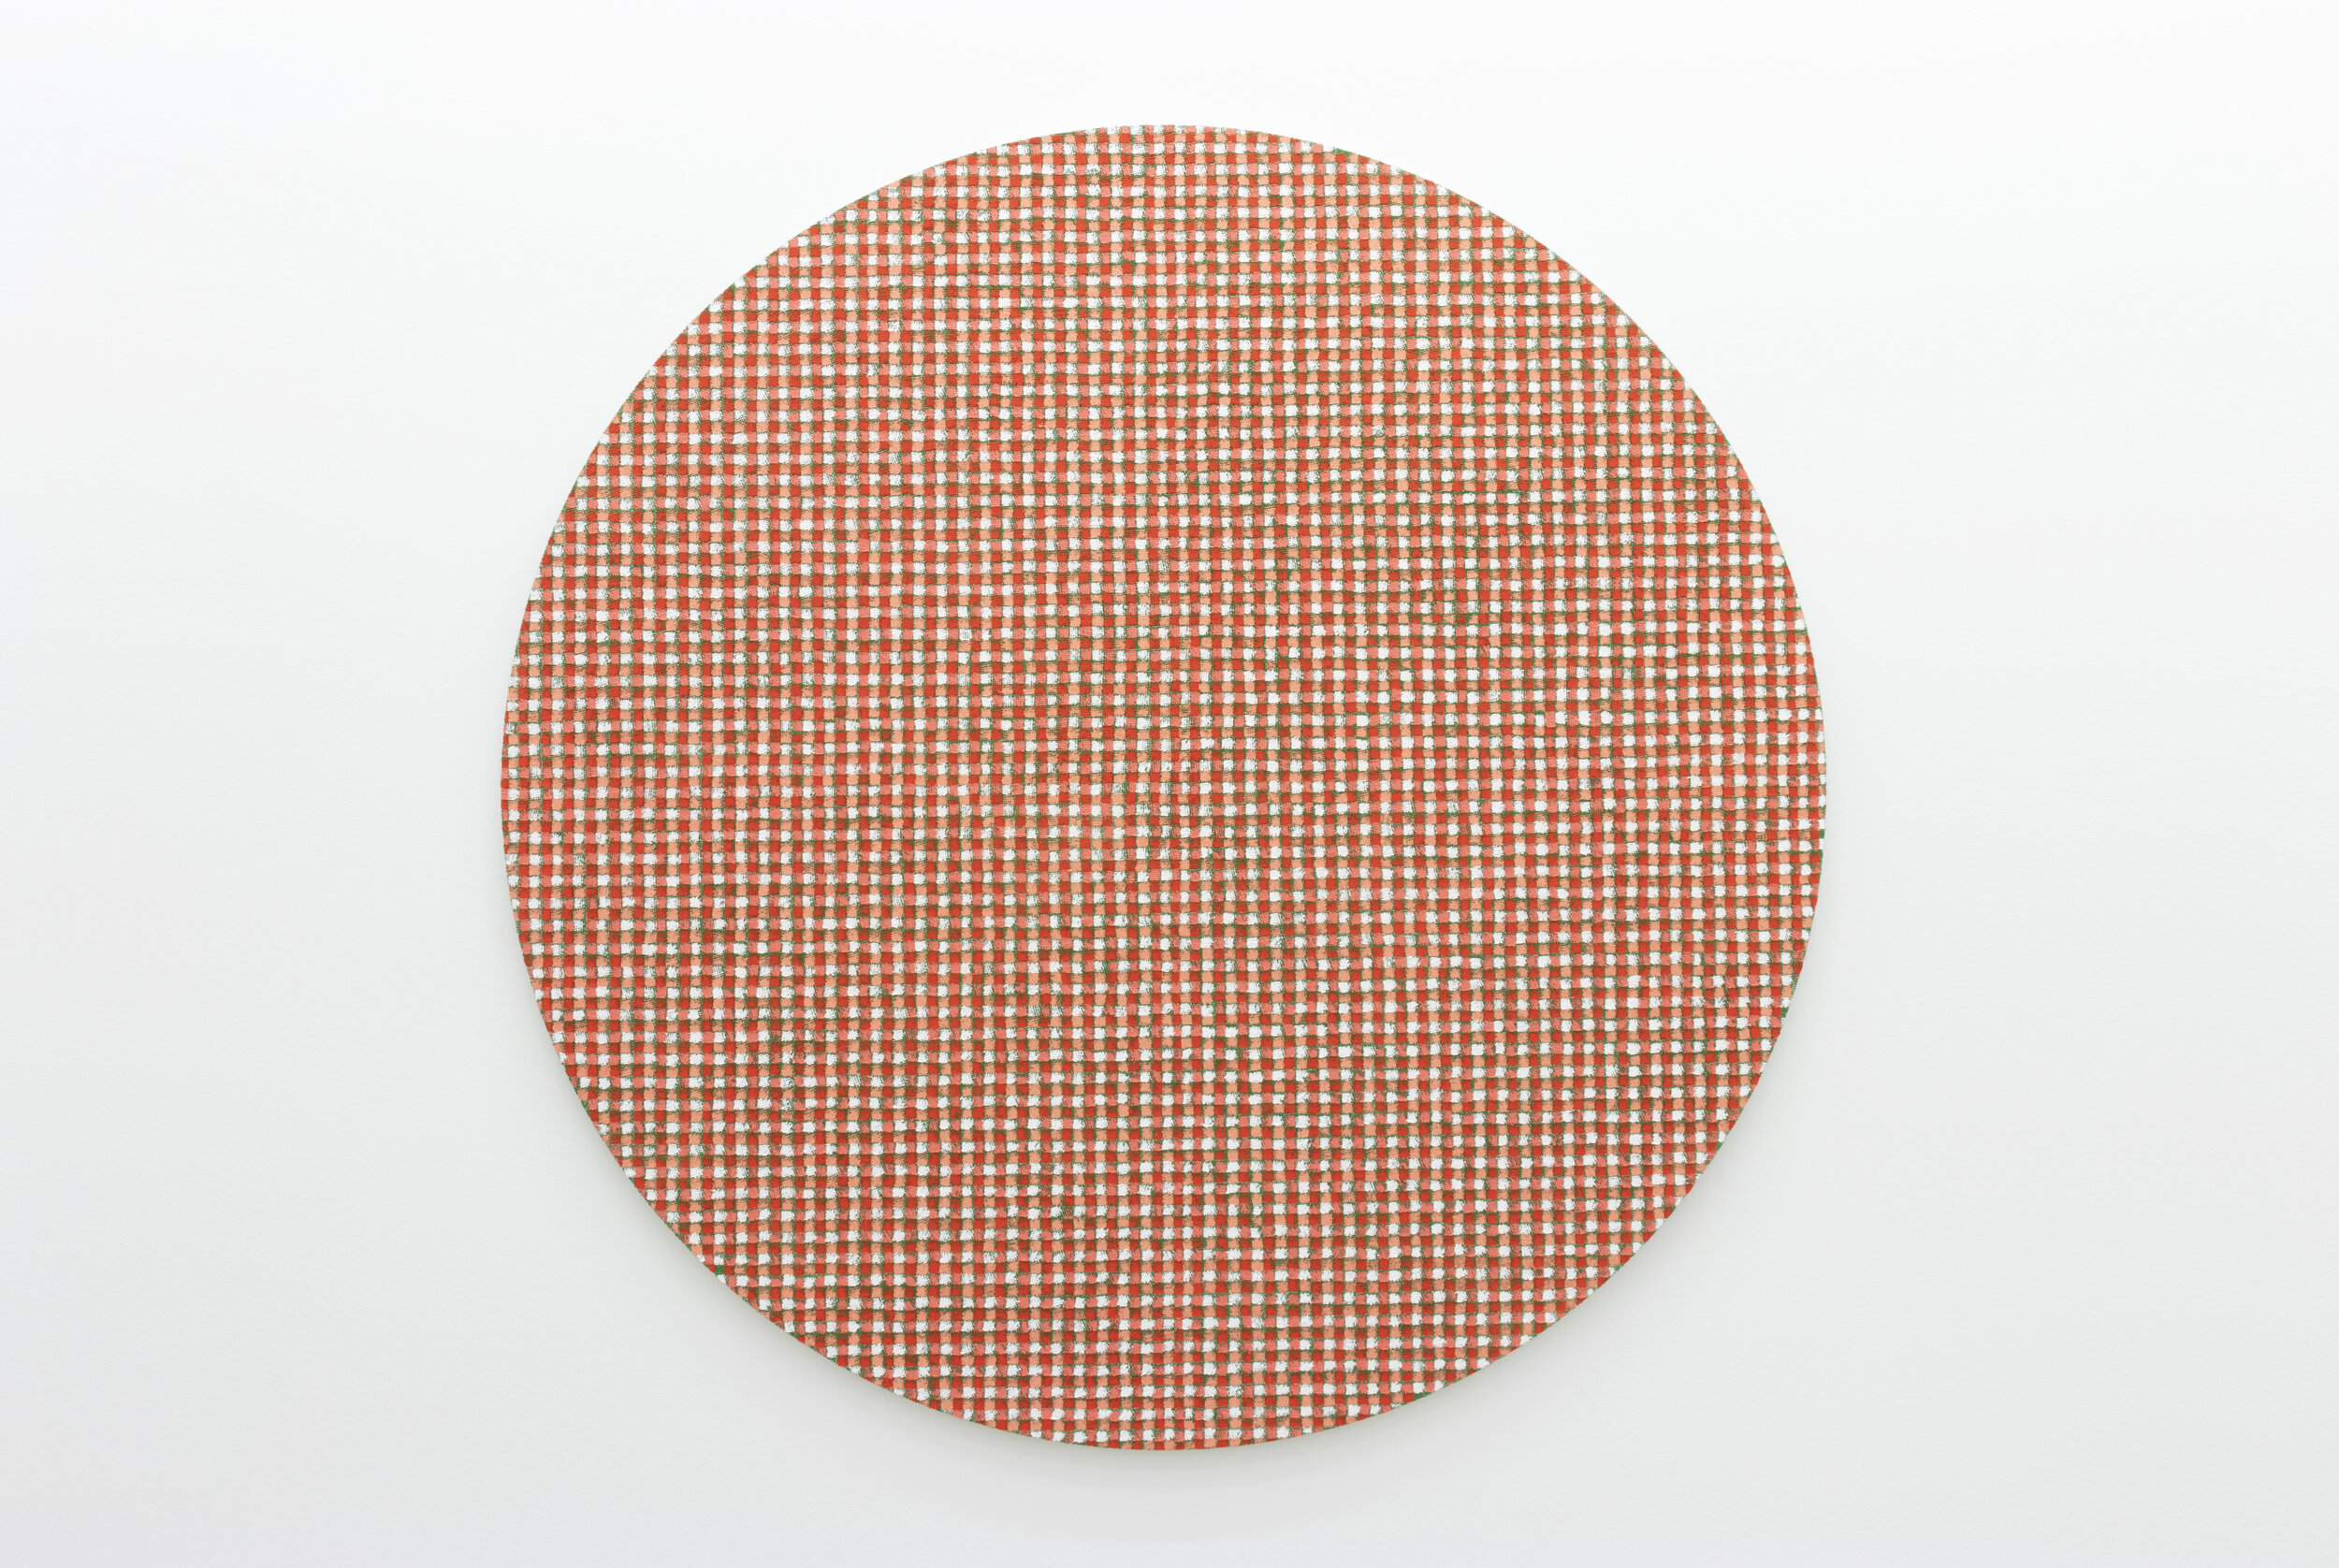  Michelle Grabner   Untitled,  2020  oil and gesso on burlap  60 in. diameter  